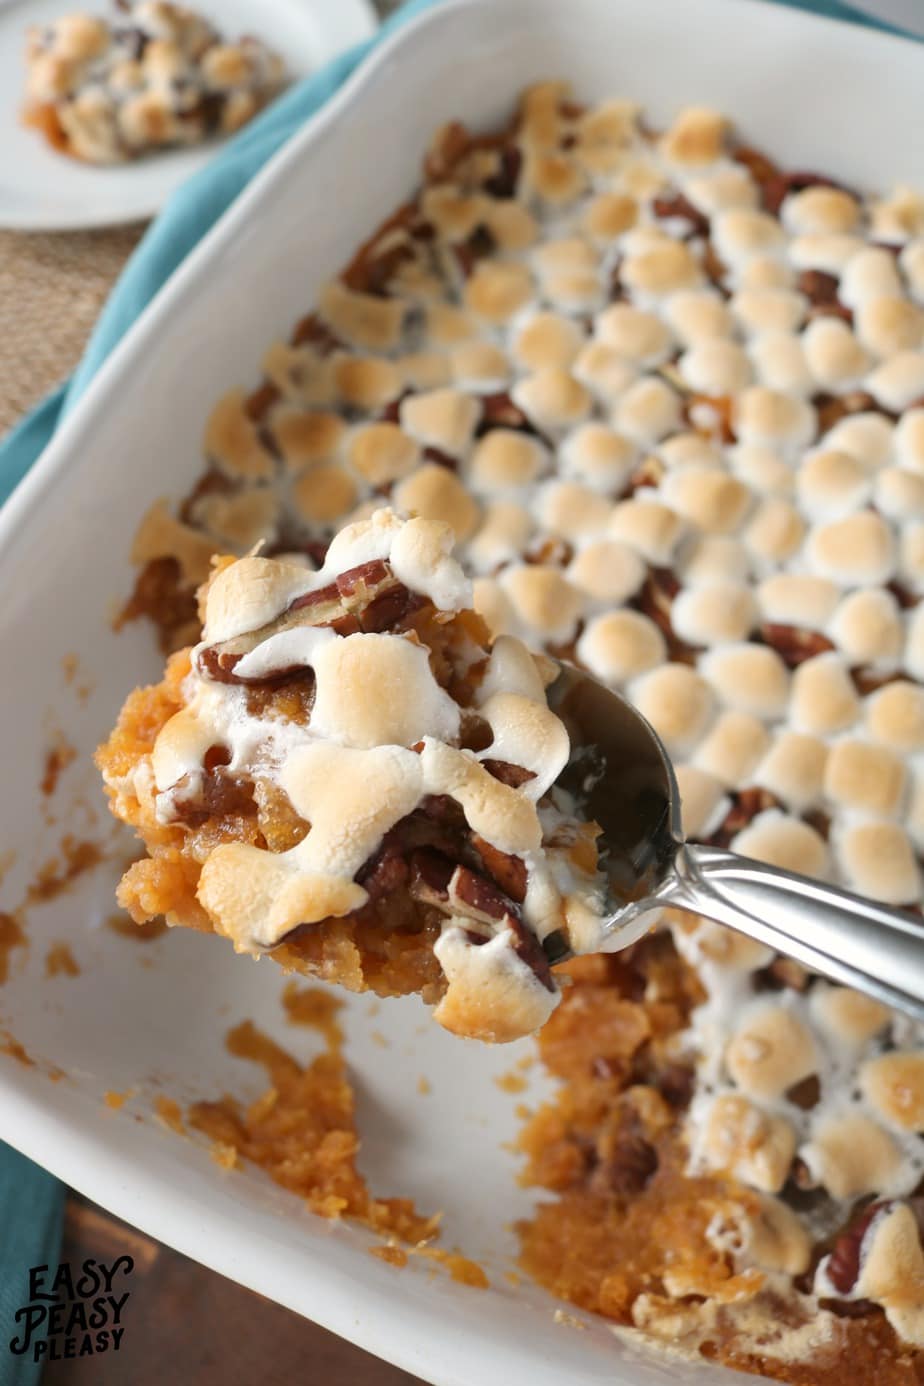 This quick and easy Sweet Potato Casserole is the perfect addition to your holidays.